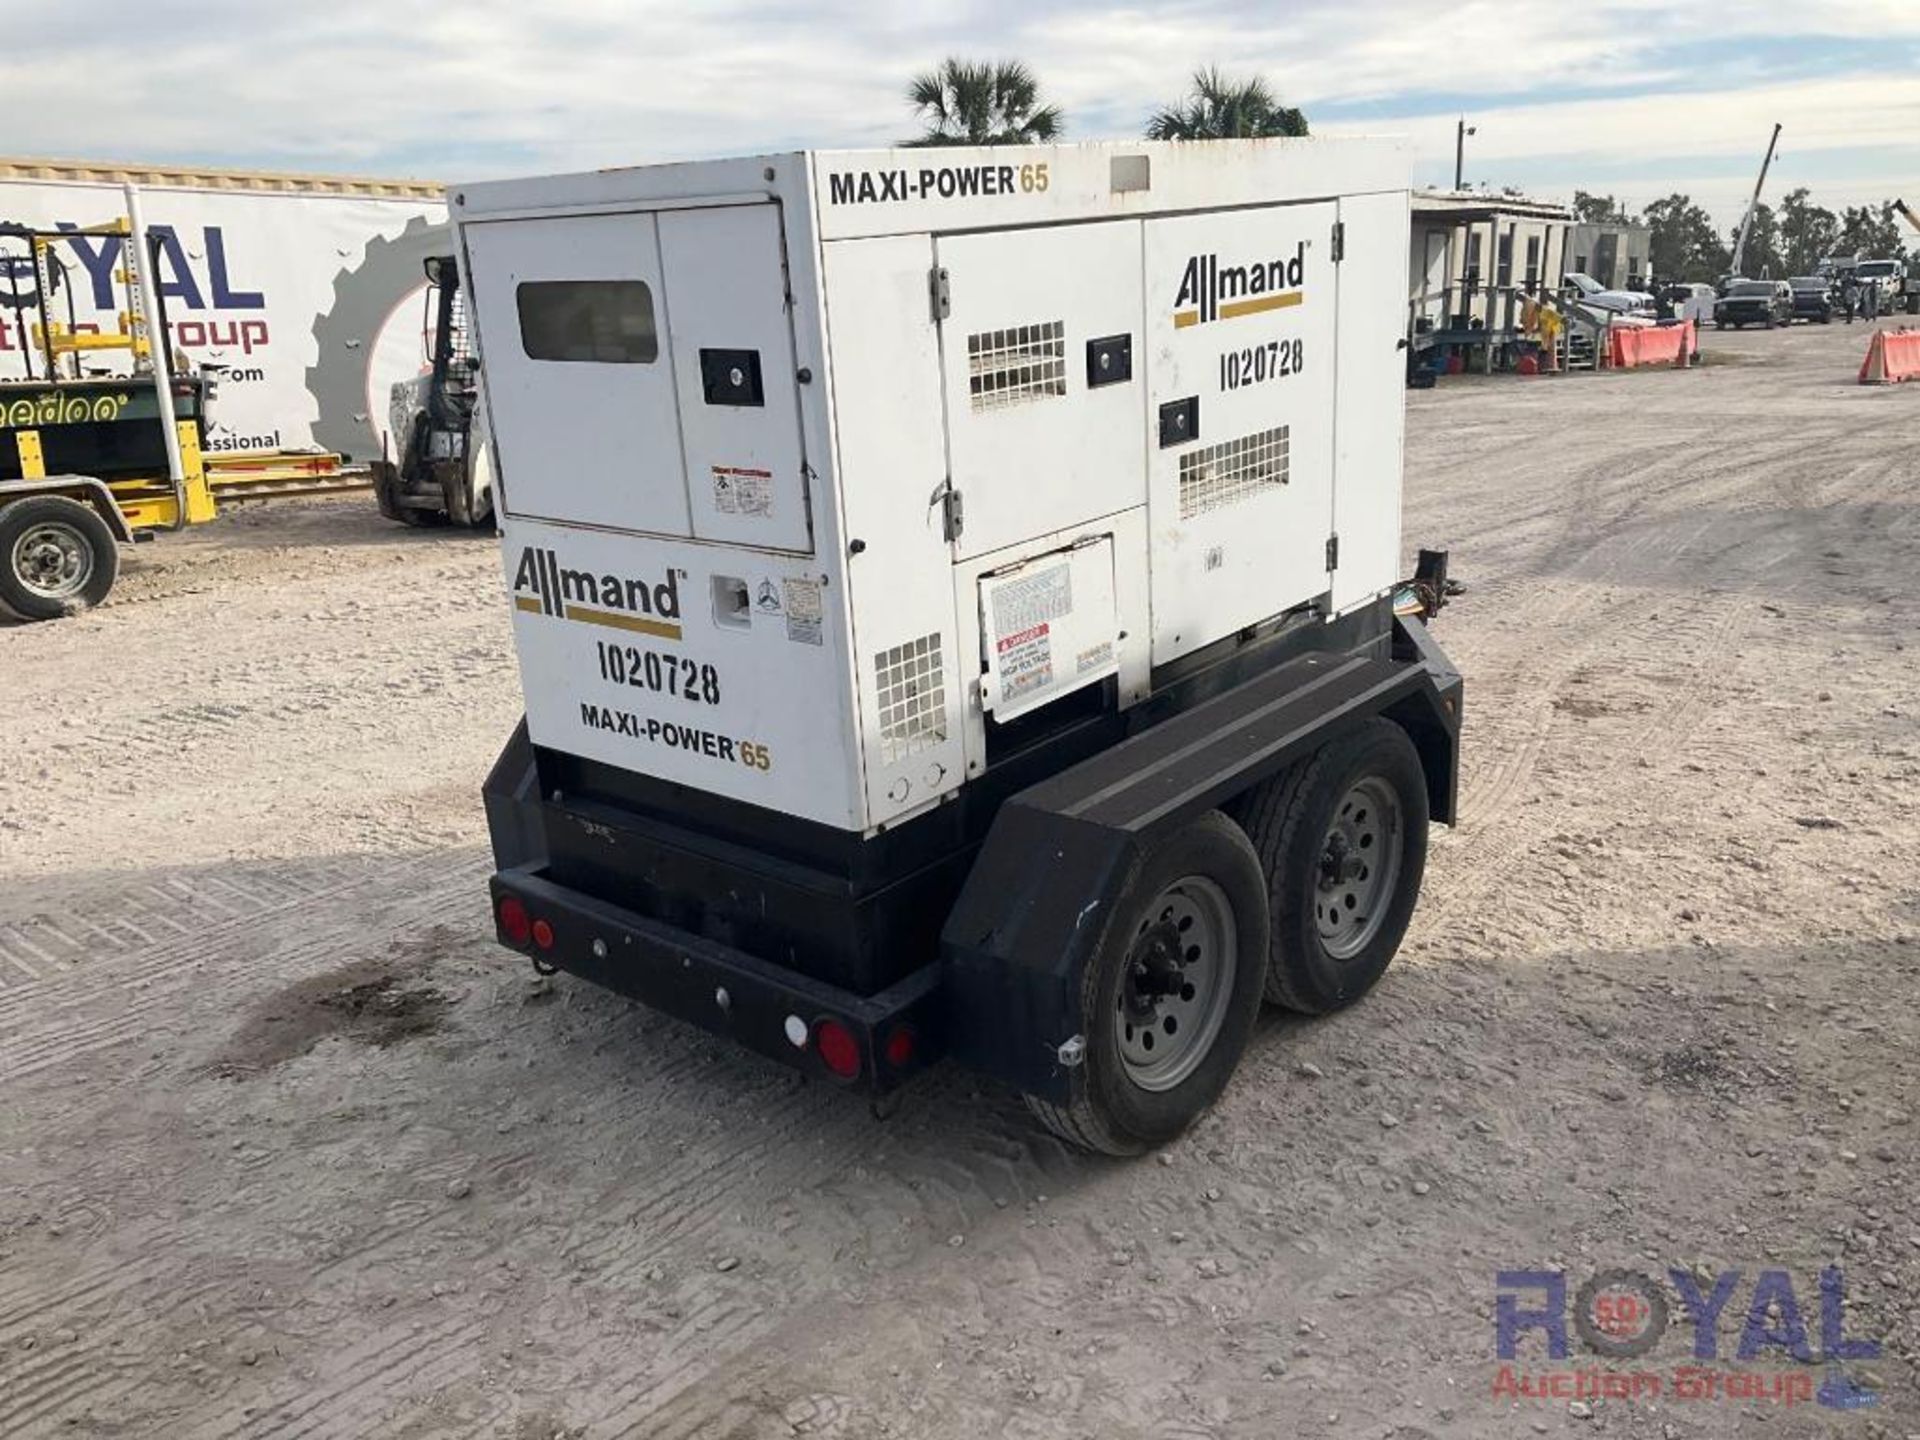 2017 Allmand Maxipower 65-8C1 T/A Towable Generator - Image 3 of 18